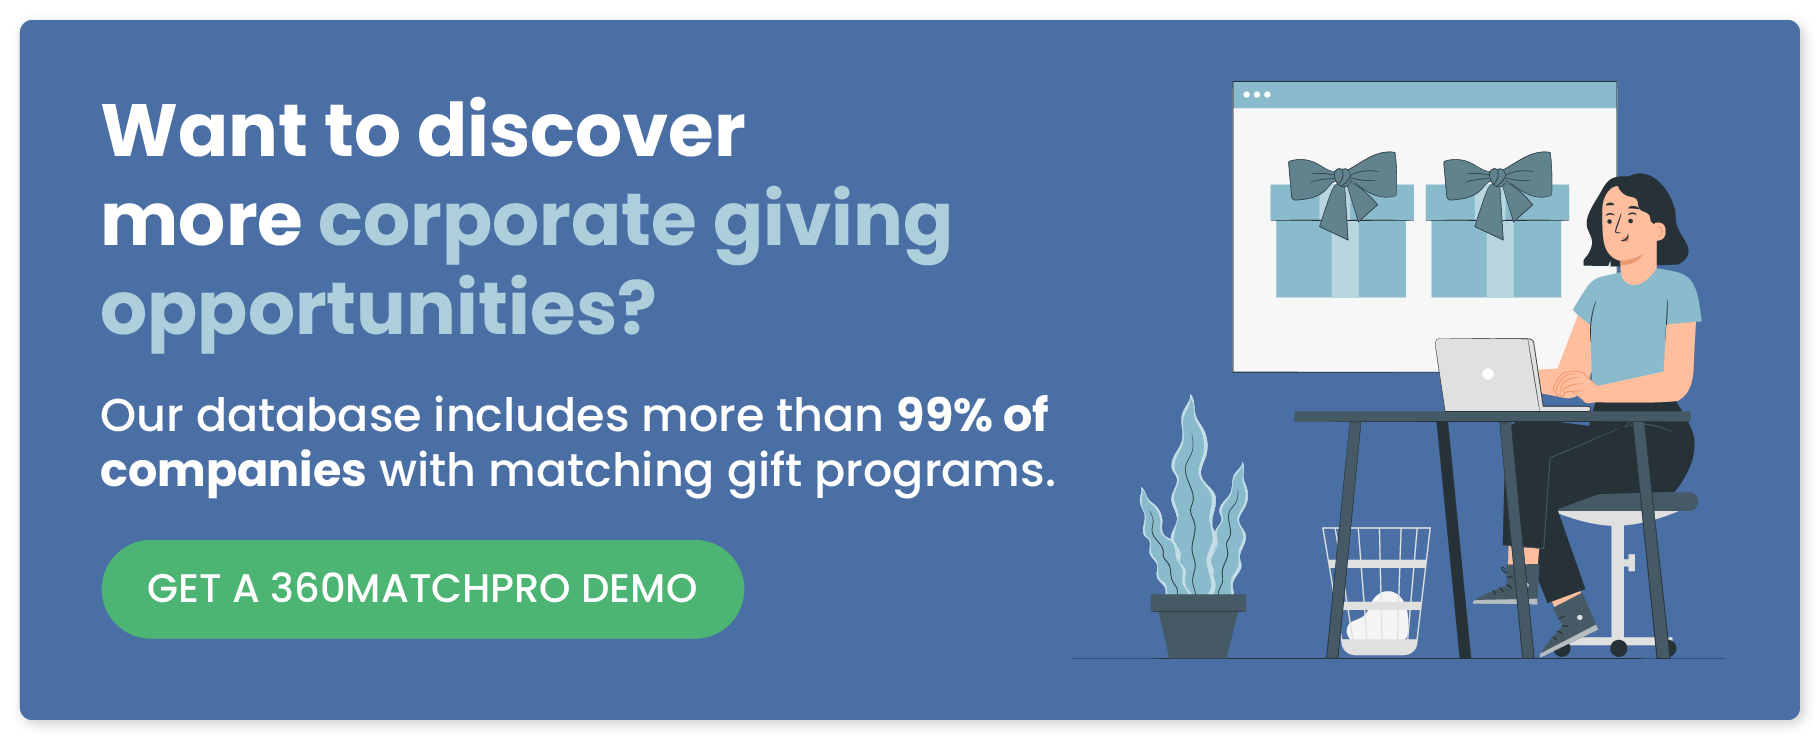 Our database includes more than 99% of companies with matching gift programs. Get a 360MatchPro demo.